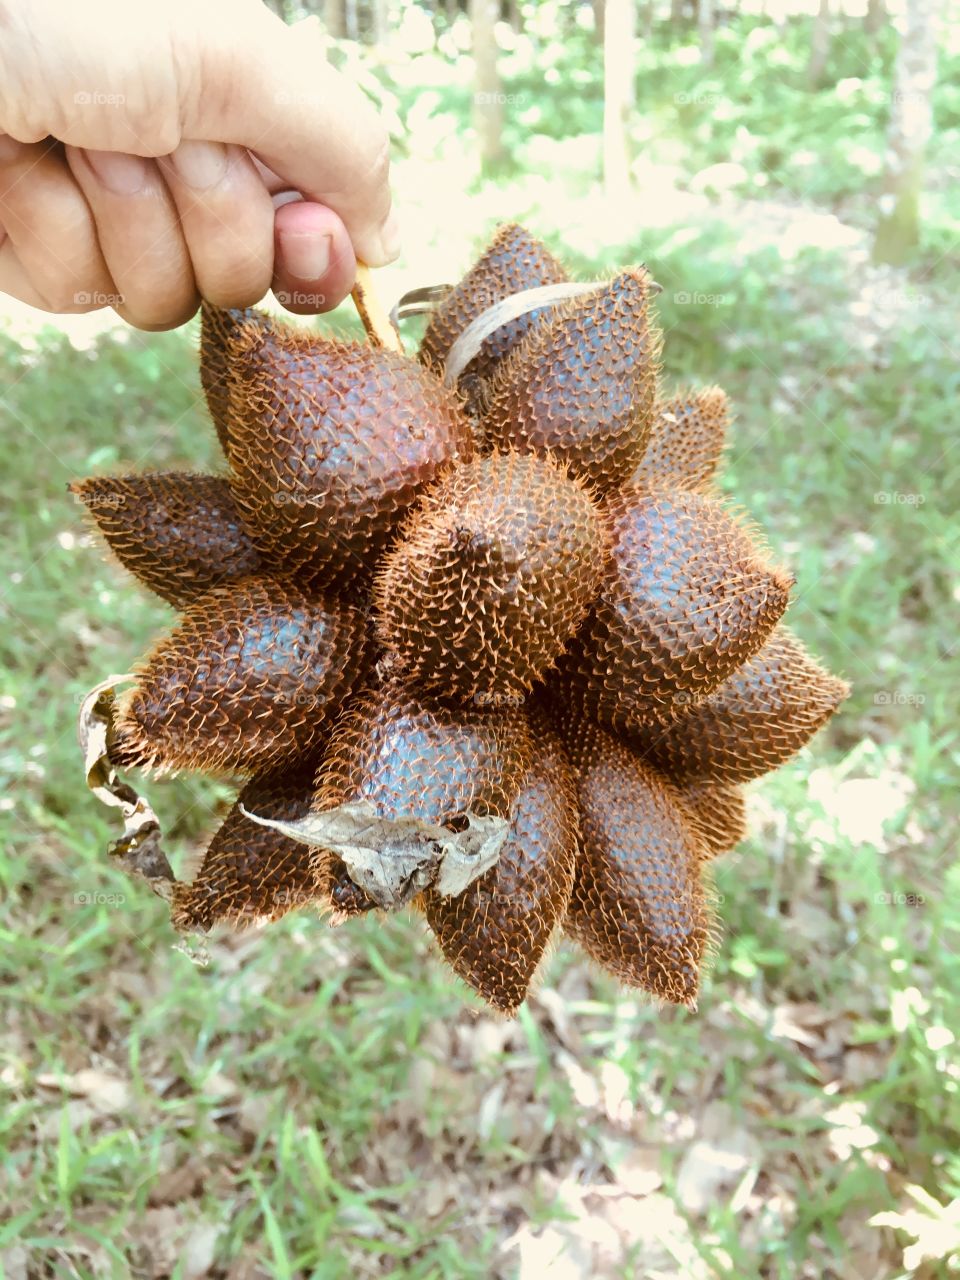 Salak , Tropical Fruit in Southern of Thailand.